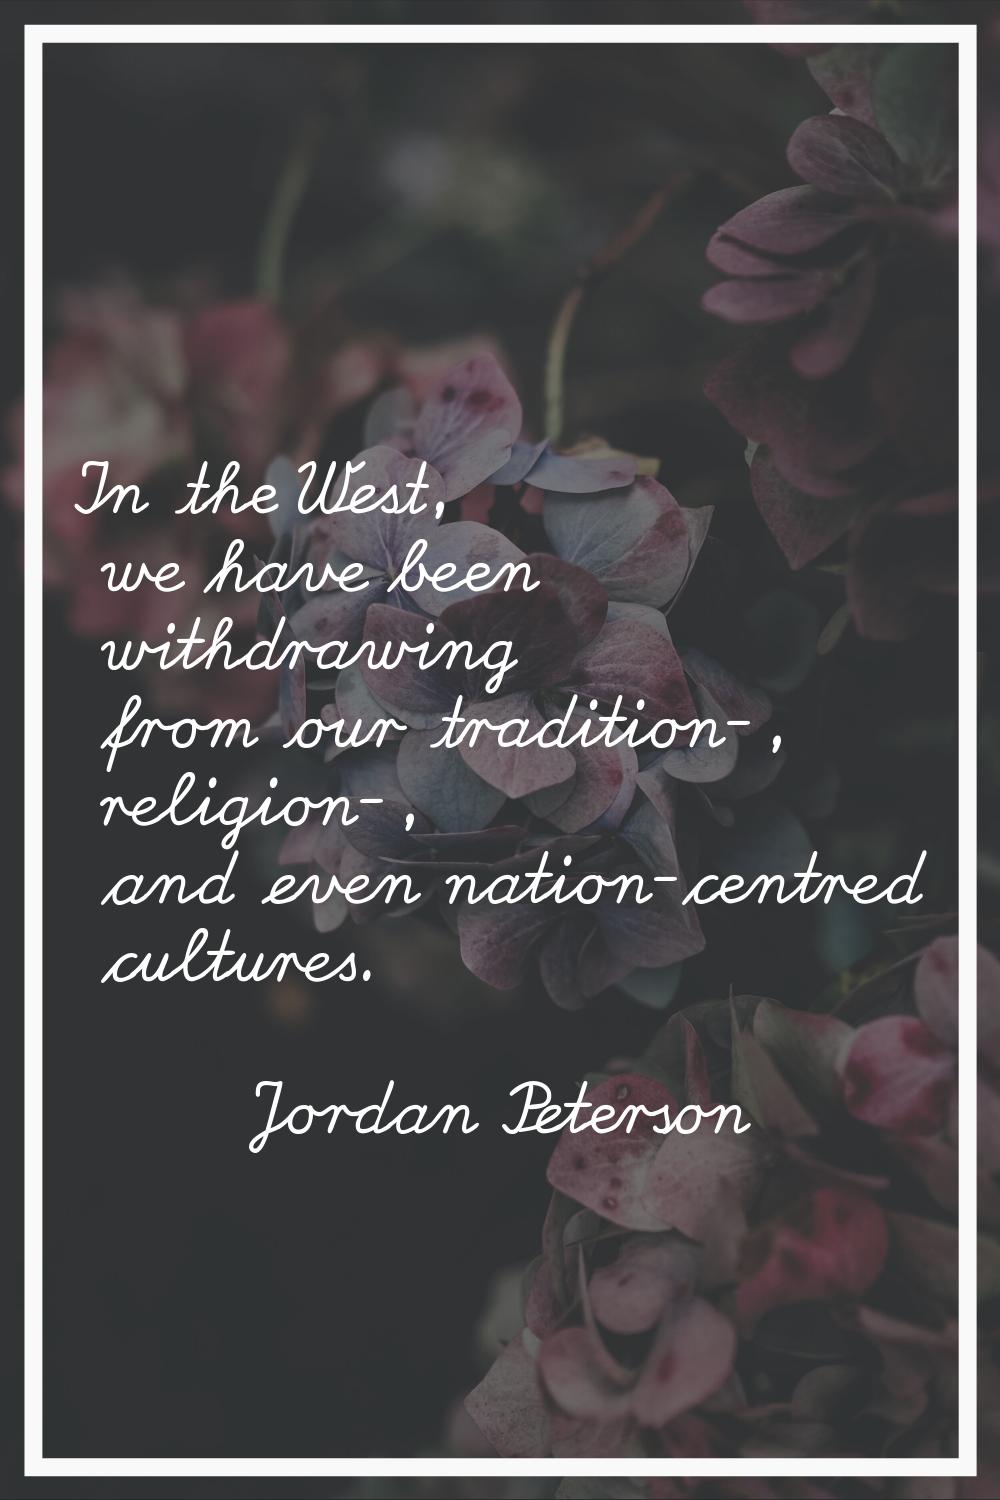 In the West, we have been withdrawing from our tradition-, religion-, and even nation-centred cultu